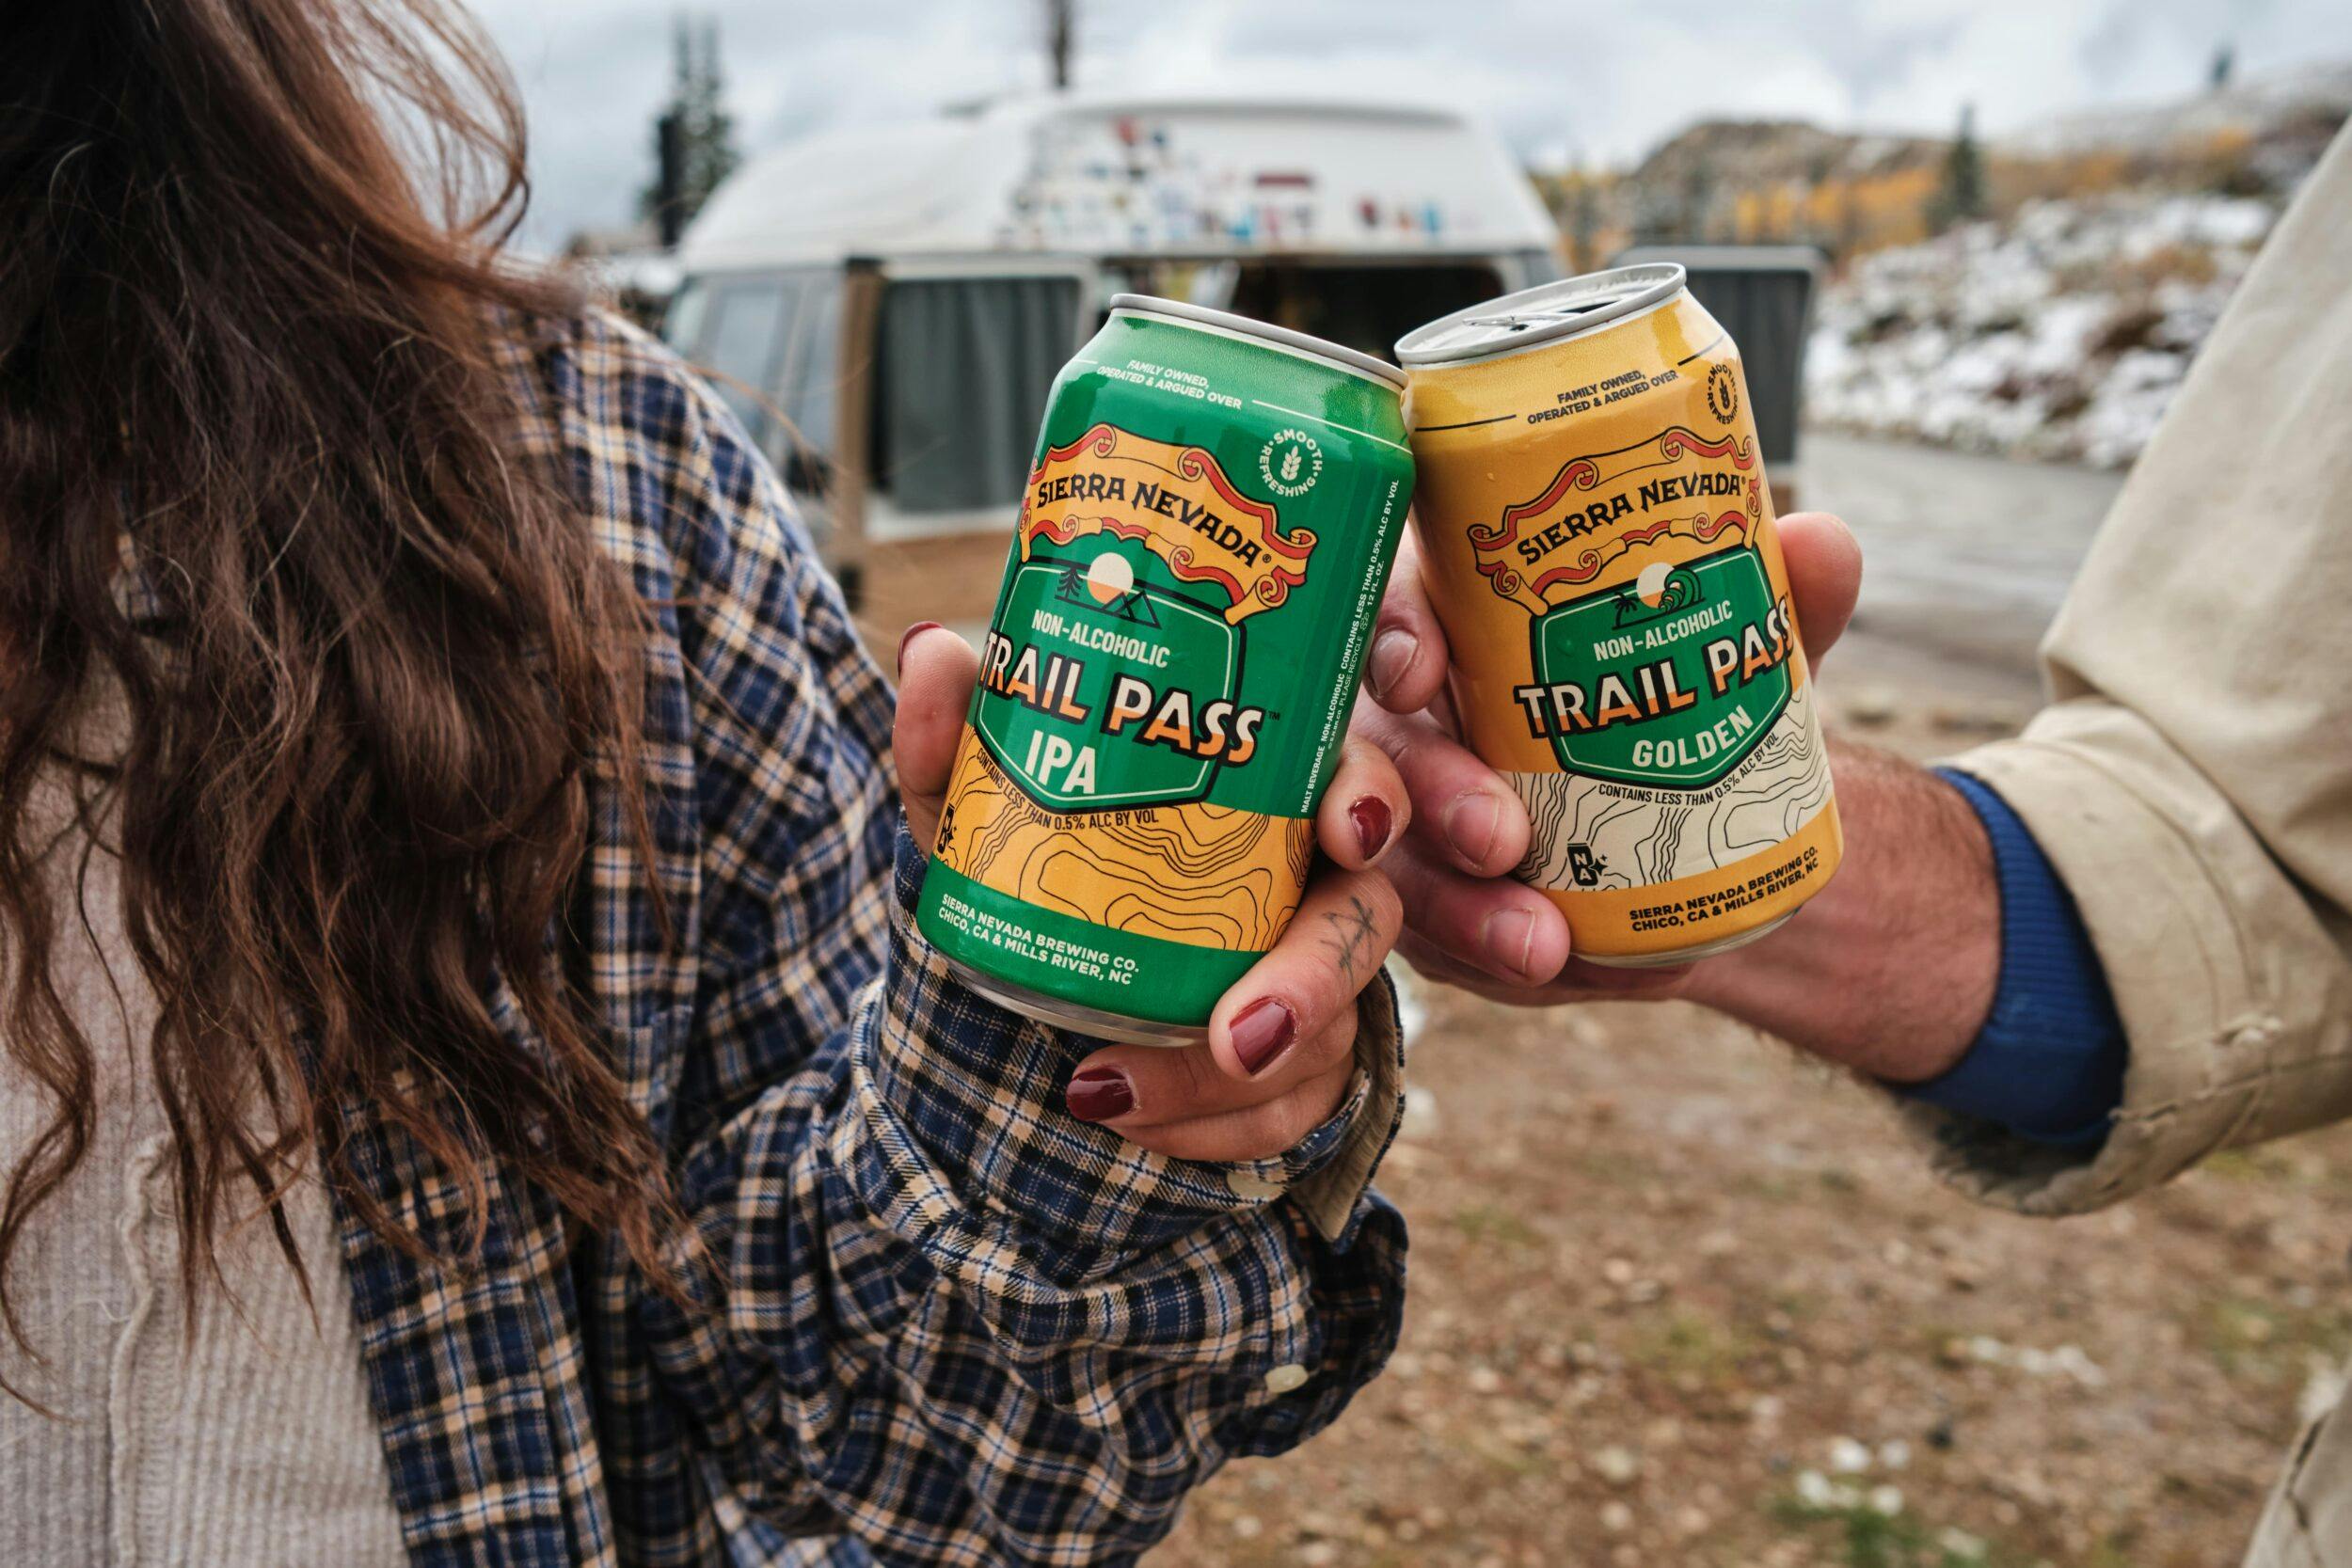 A young woman and a young man, outside of a camper van, toasting cans of non-alcoholic Sierra Nevada Trail Pass IPA and Trail Pass Golden